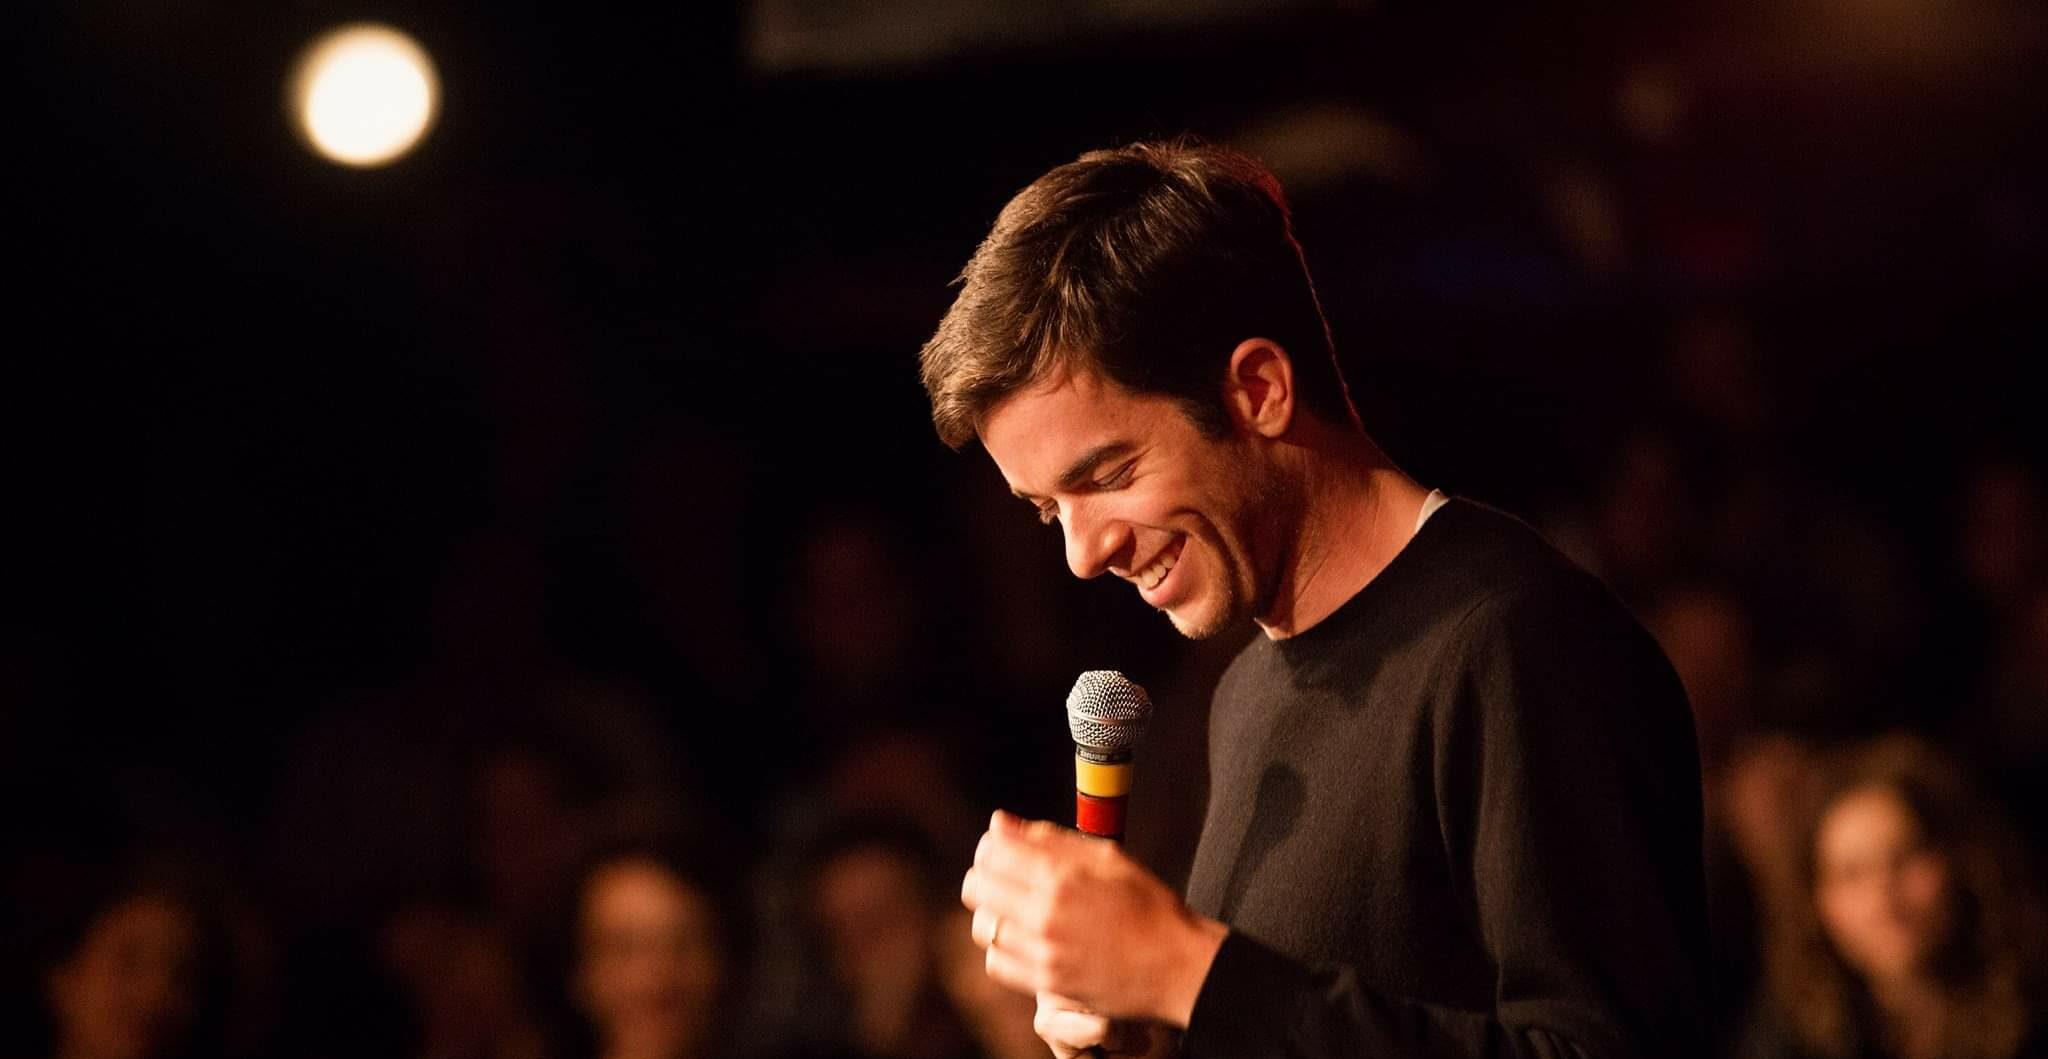 A photo showing John Mulaney telling jokes to a vast audience